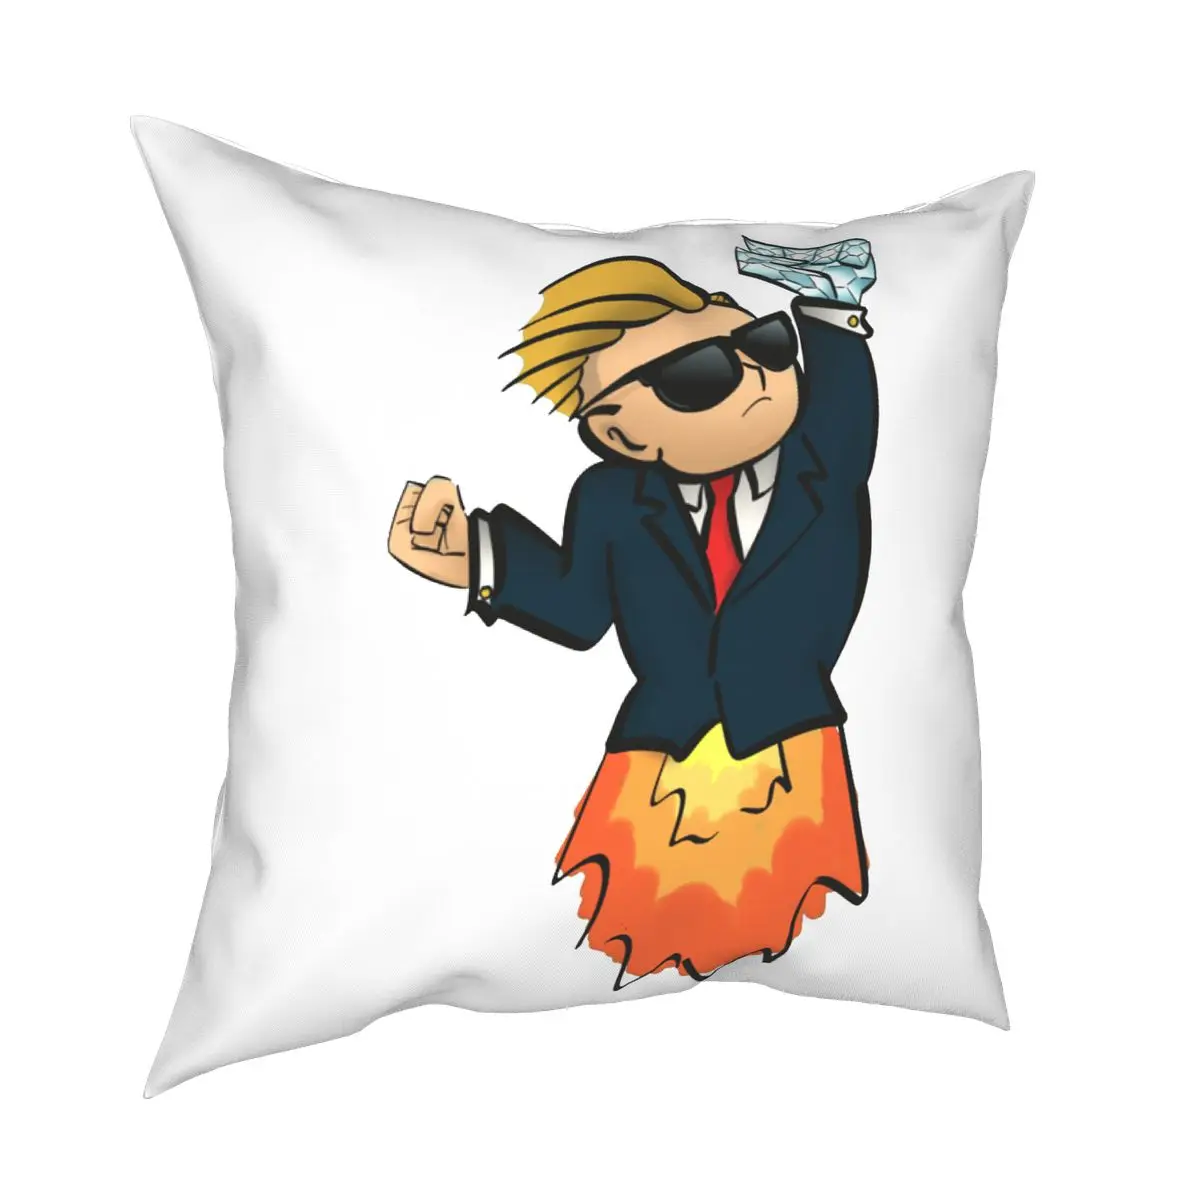 

Wallstreetbets WSB The Kid GameStop Stonks Throw Pillow Cover To the Moon With Diamond Hands GME Stock Trader Cushion Covers